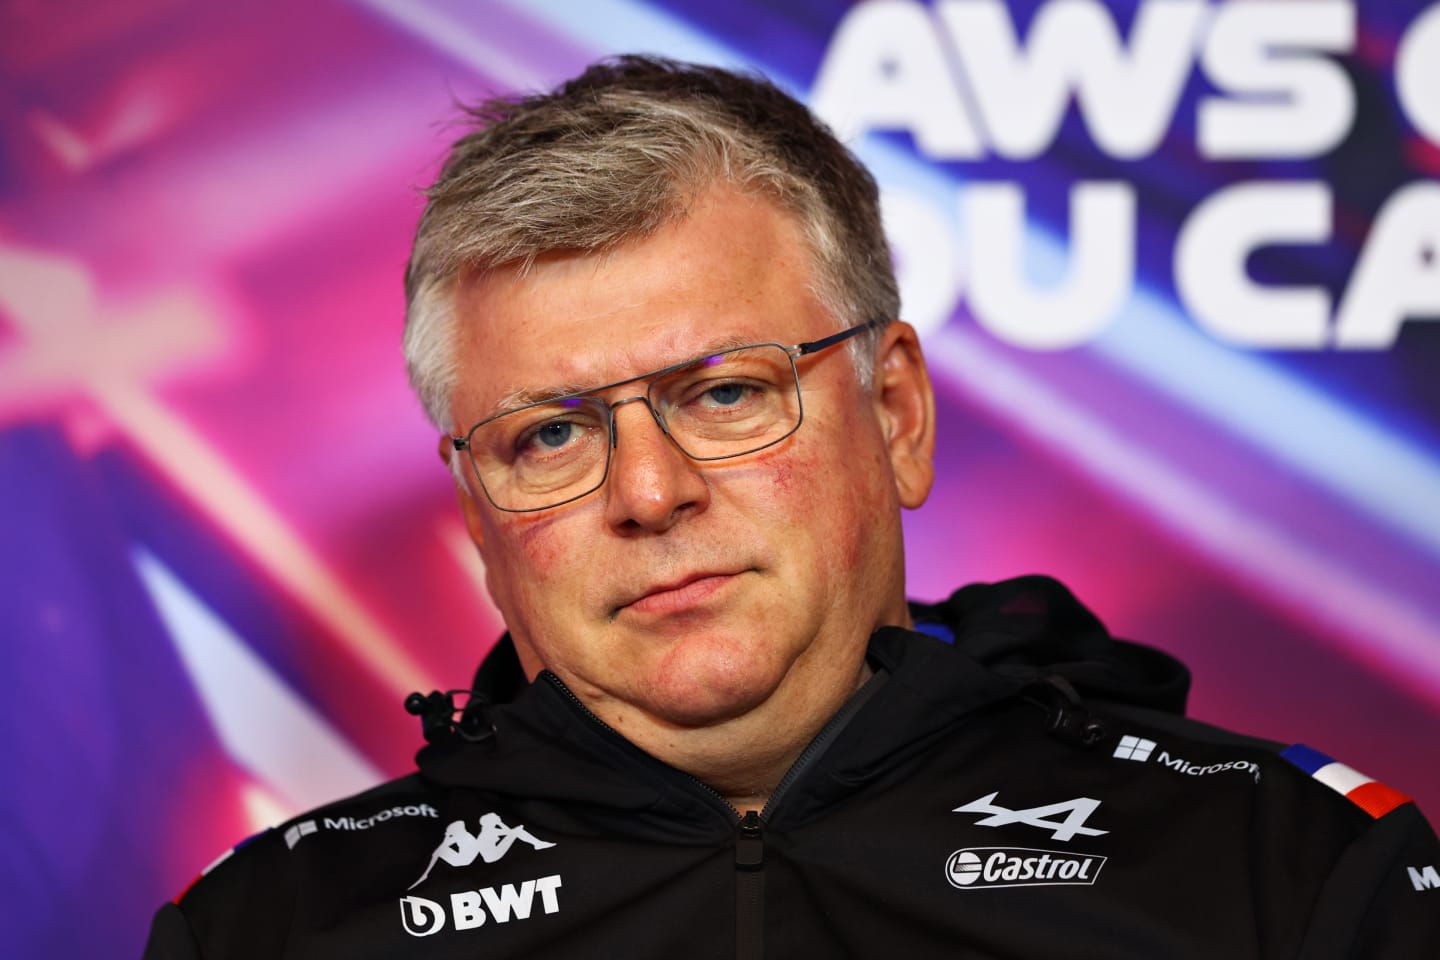 MONTREAL, QUEBEC - JUNE 18: Otmar Szafnauer, Team Principal of Alpine F1 looks on in the Team Principals Press Conference prior to final practice ahead of the F1 Grand Prix of Canada at Circuit Gilles Villeneuve on June 18, 2022 in Montreal, Quebec. (Photo by Clive Rose/Getty Images)